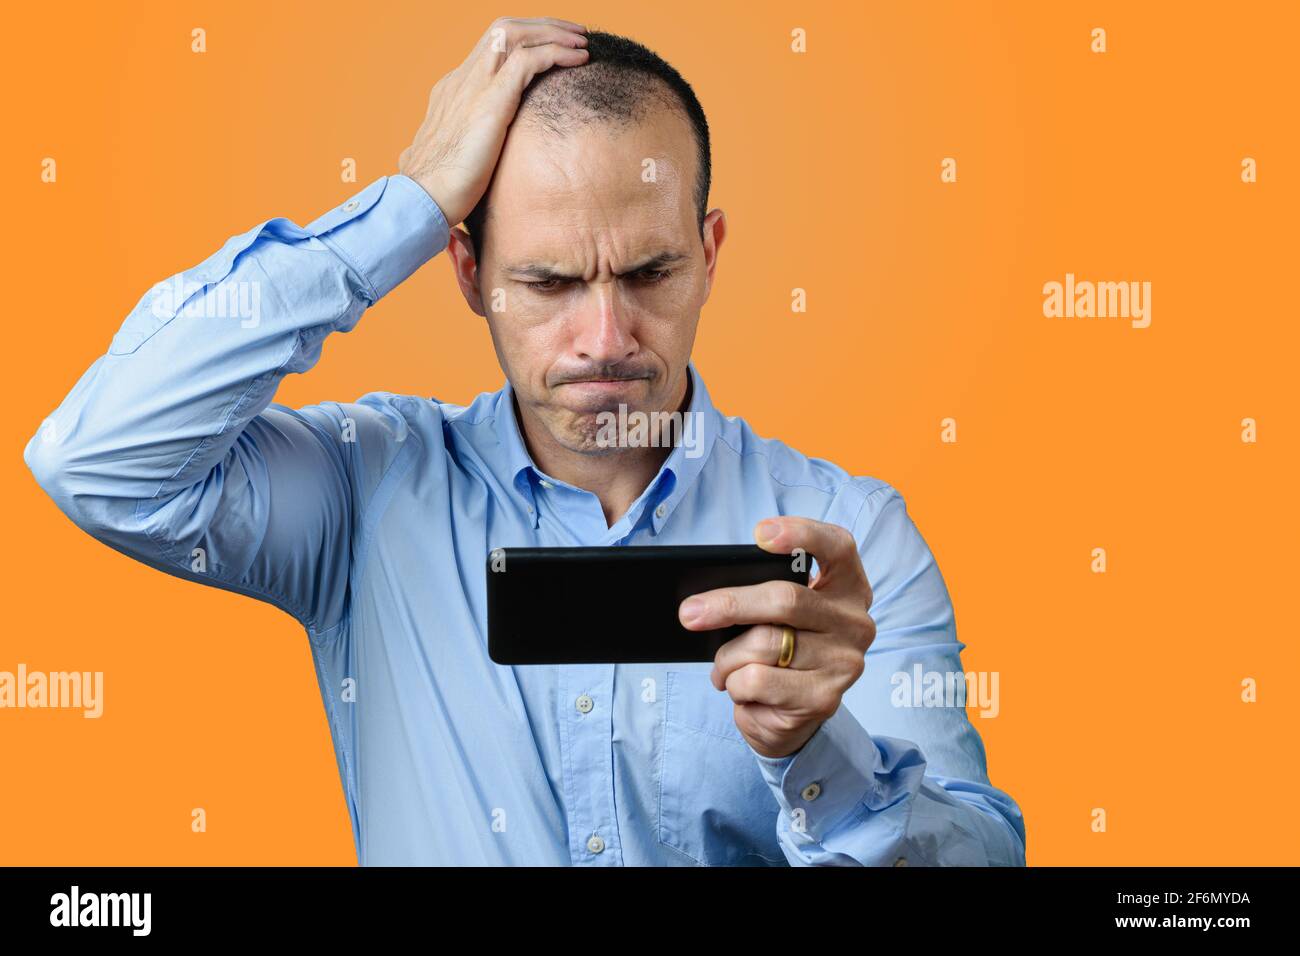 Mature man in formal wear, looking at his smartphone, disappointed and with his right hand on his head. Orange background. Stock Photo